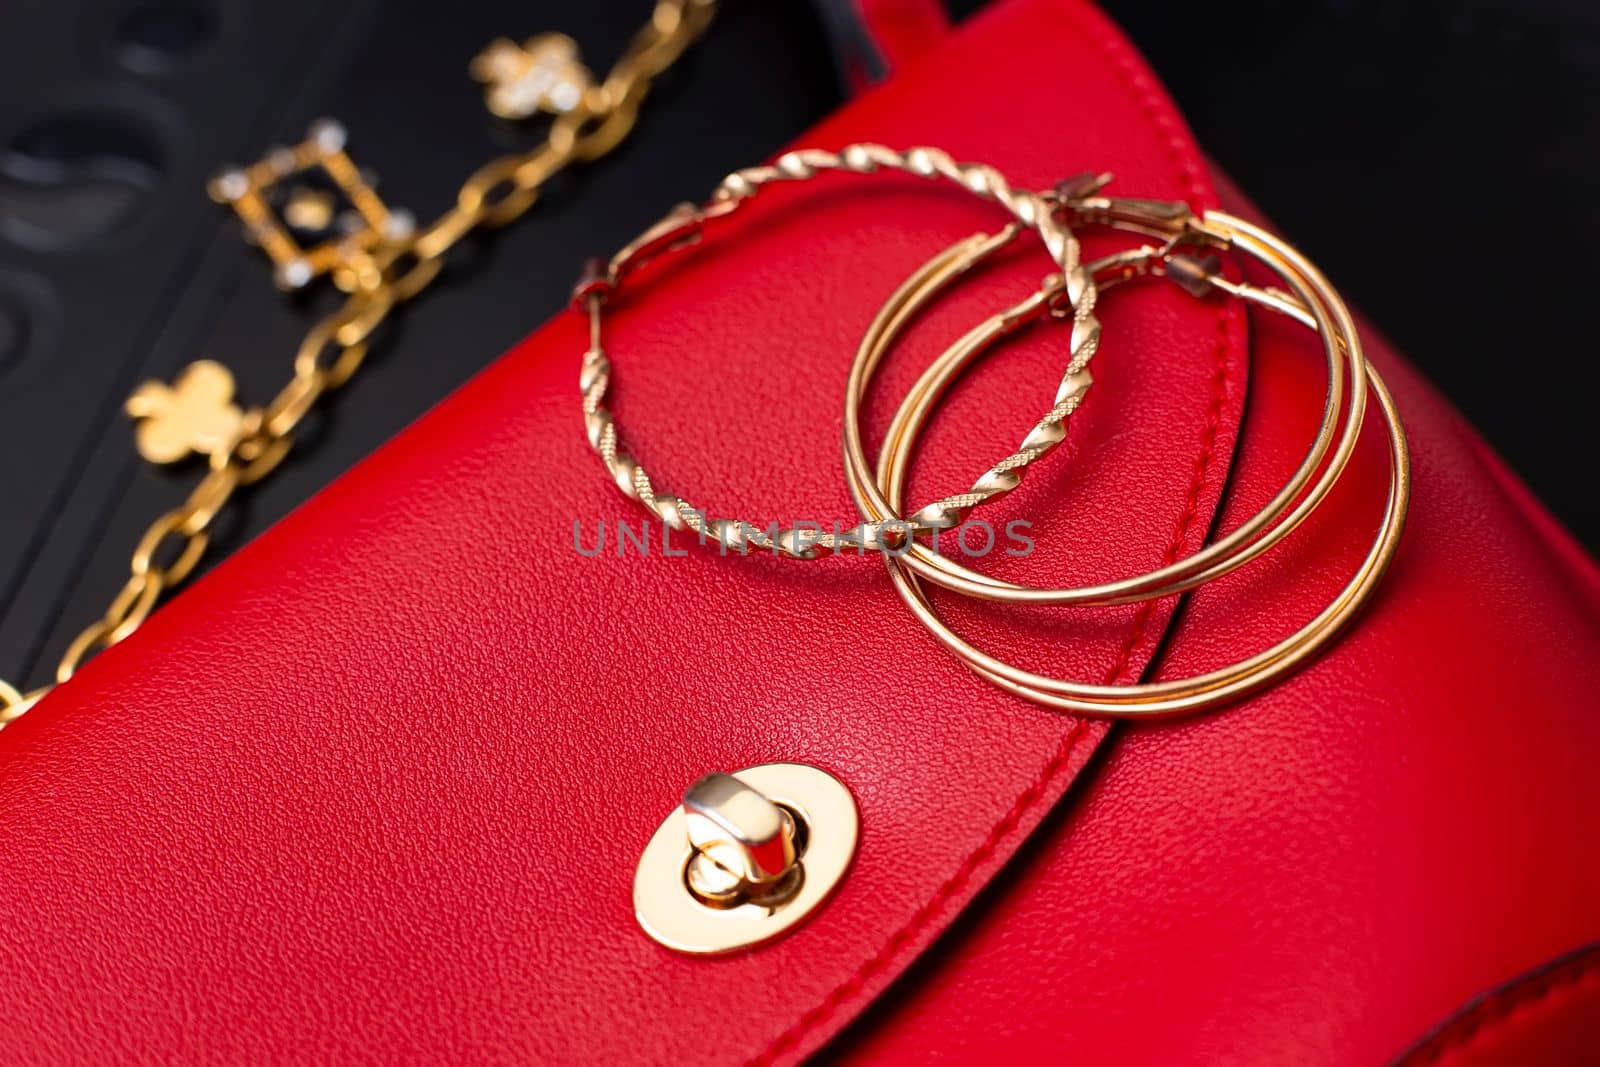 Gold ring earrings and costume jewelry lie on a red leather bag by Zakharova